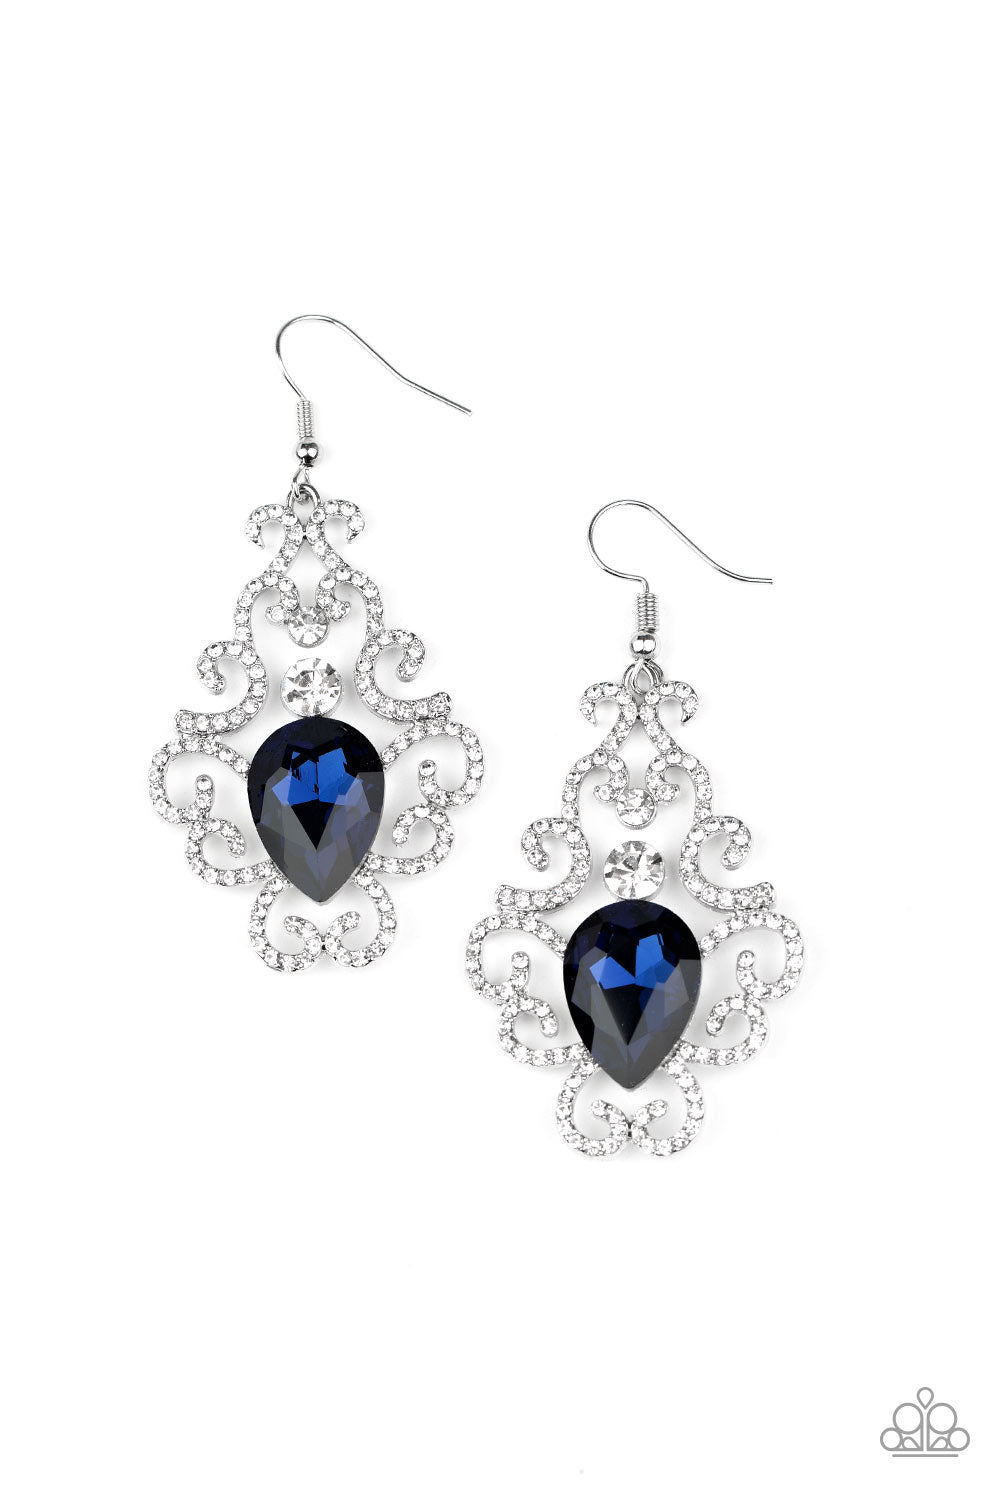 Paparazzi Happily Ever AFTERGLOW Blue Fishhook Earrings - P5ST-BLXX-014XX